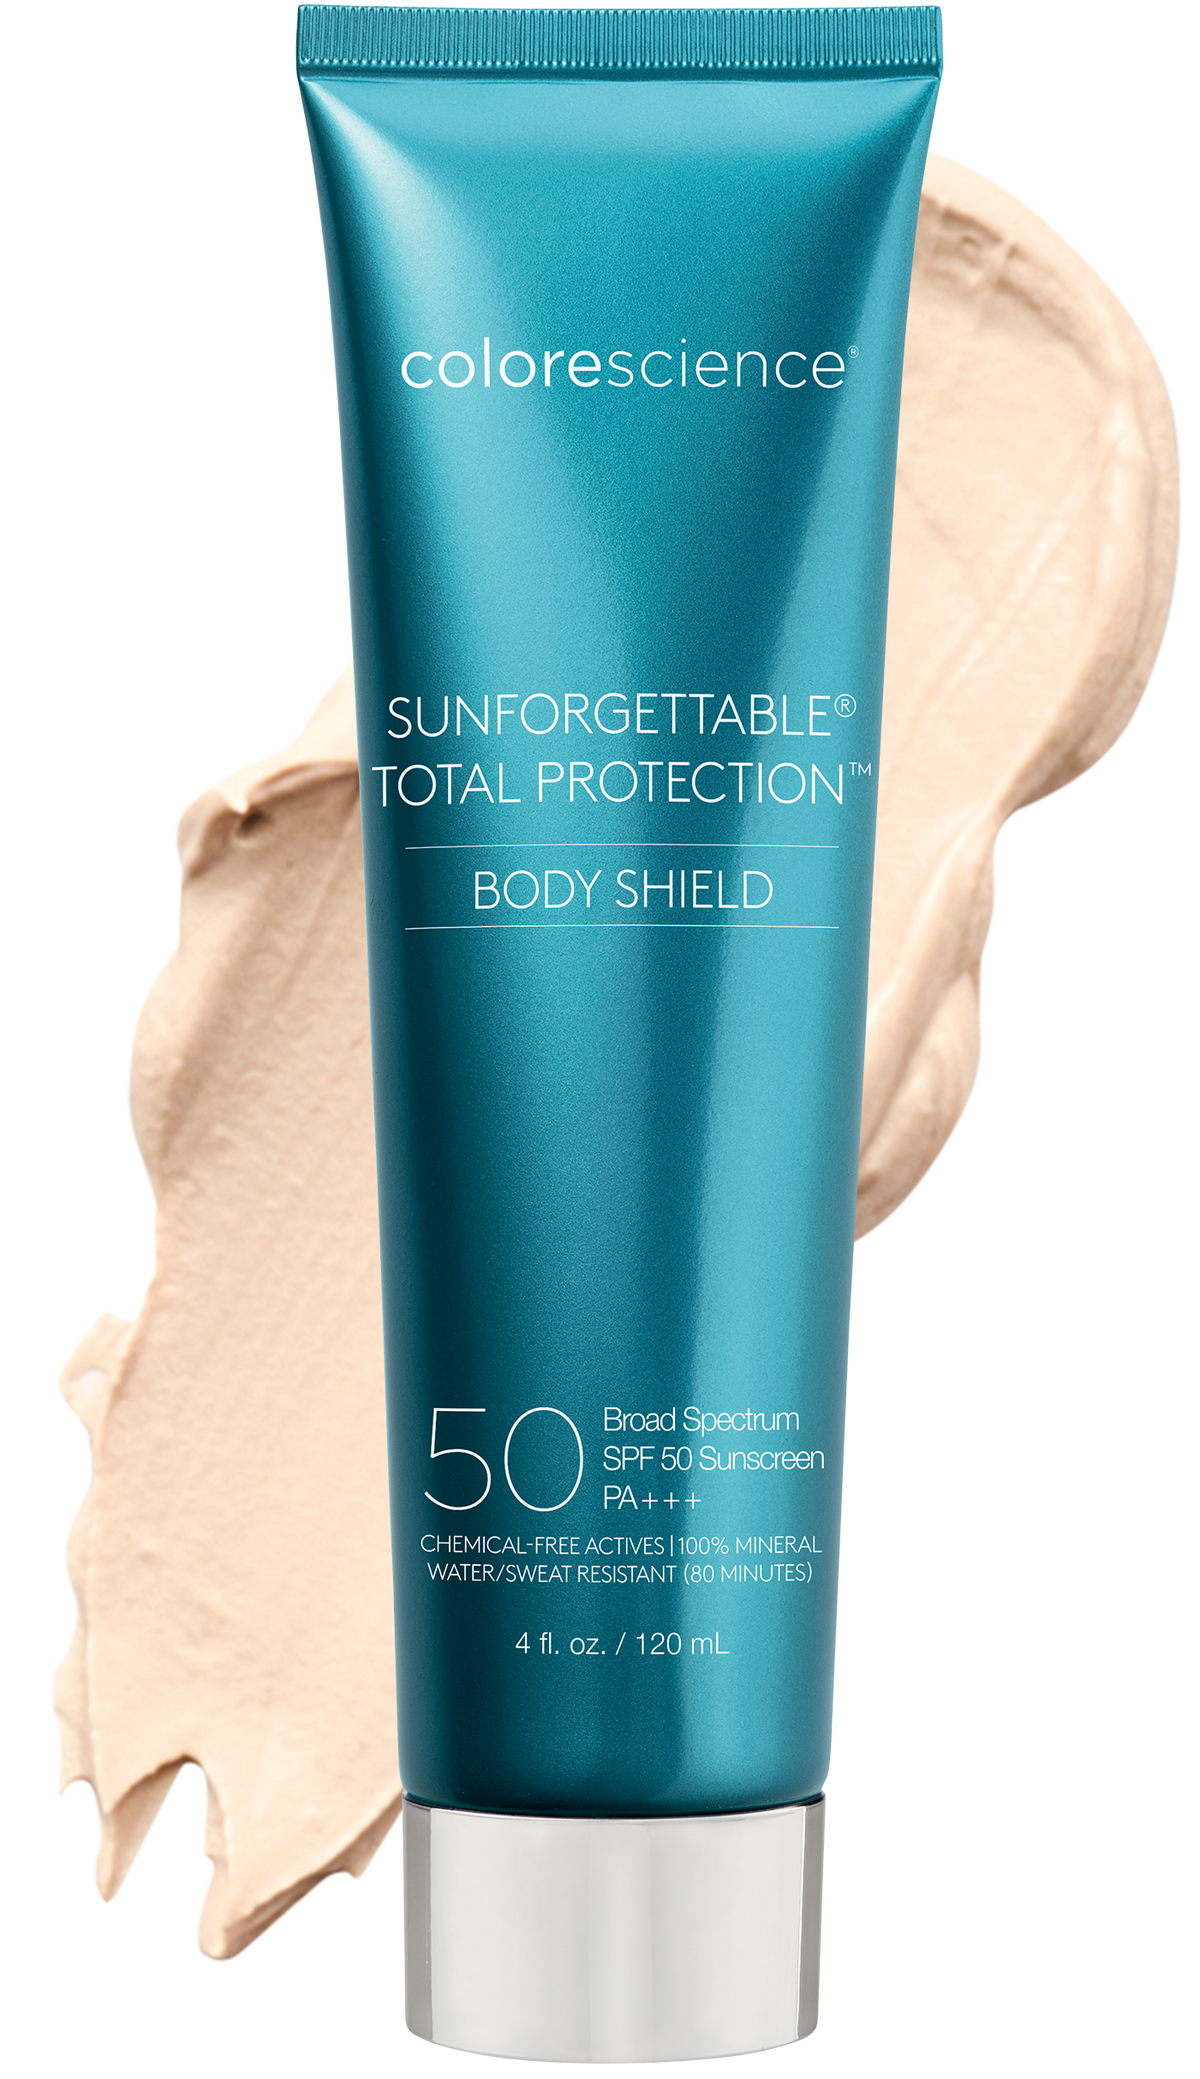 Colorescience 全效保護礦物⾝體防曬乳液 Total Protection™ Body Shield SPF50